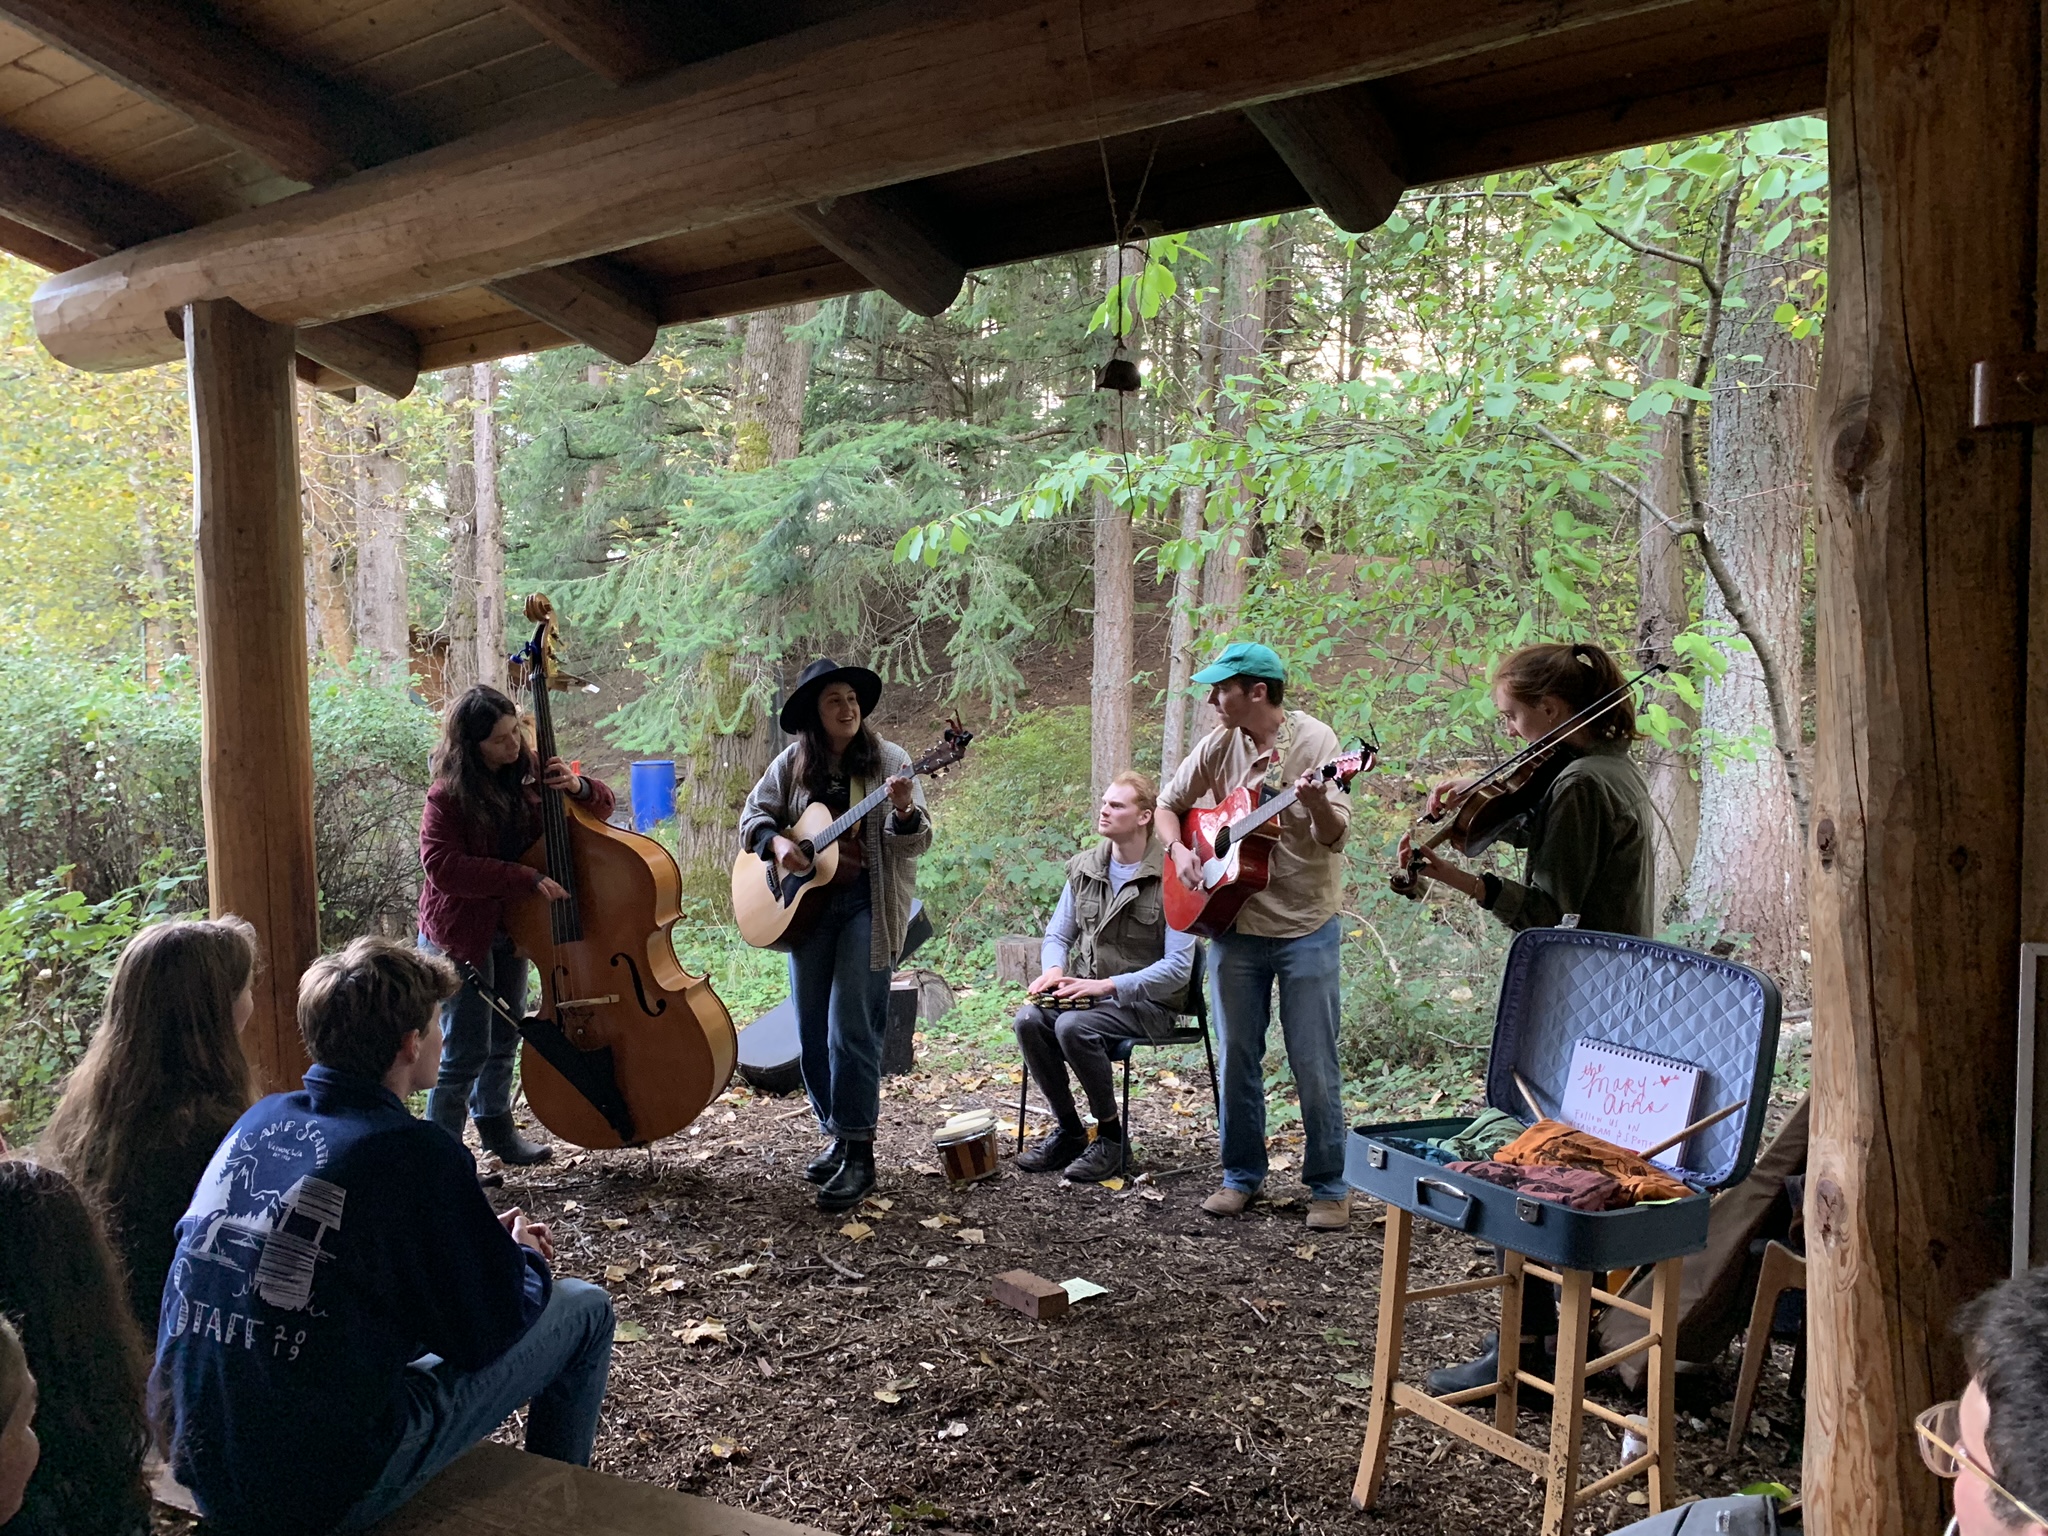 Live music at the AS Outback Farm